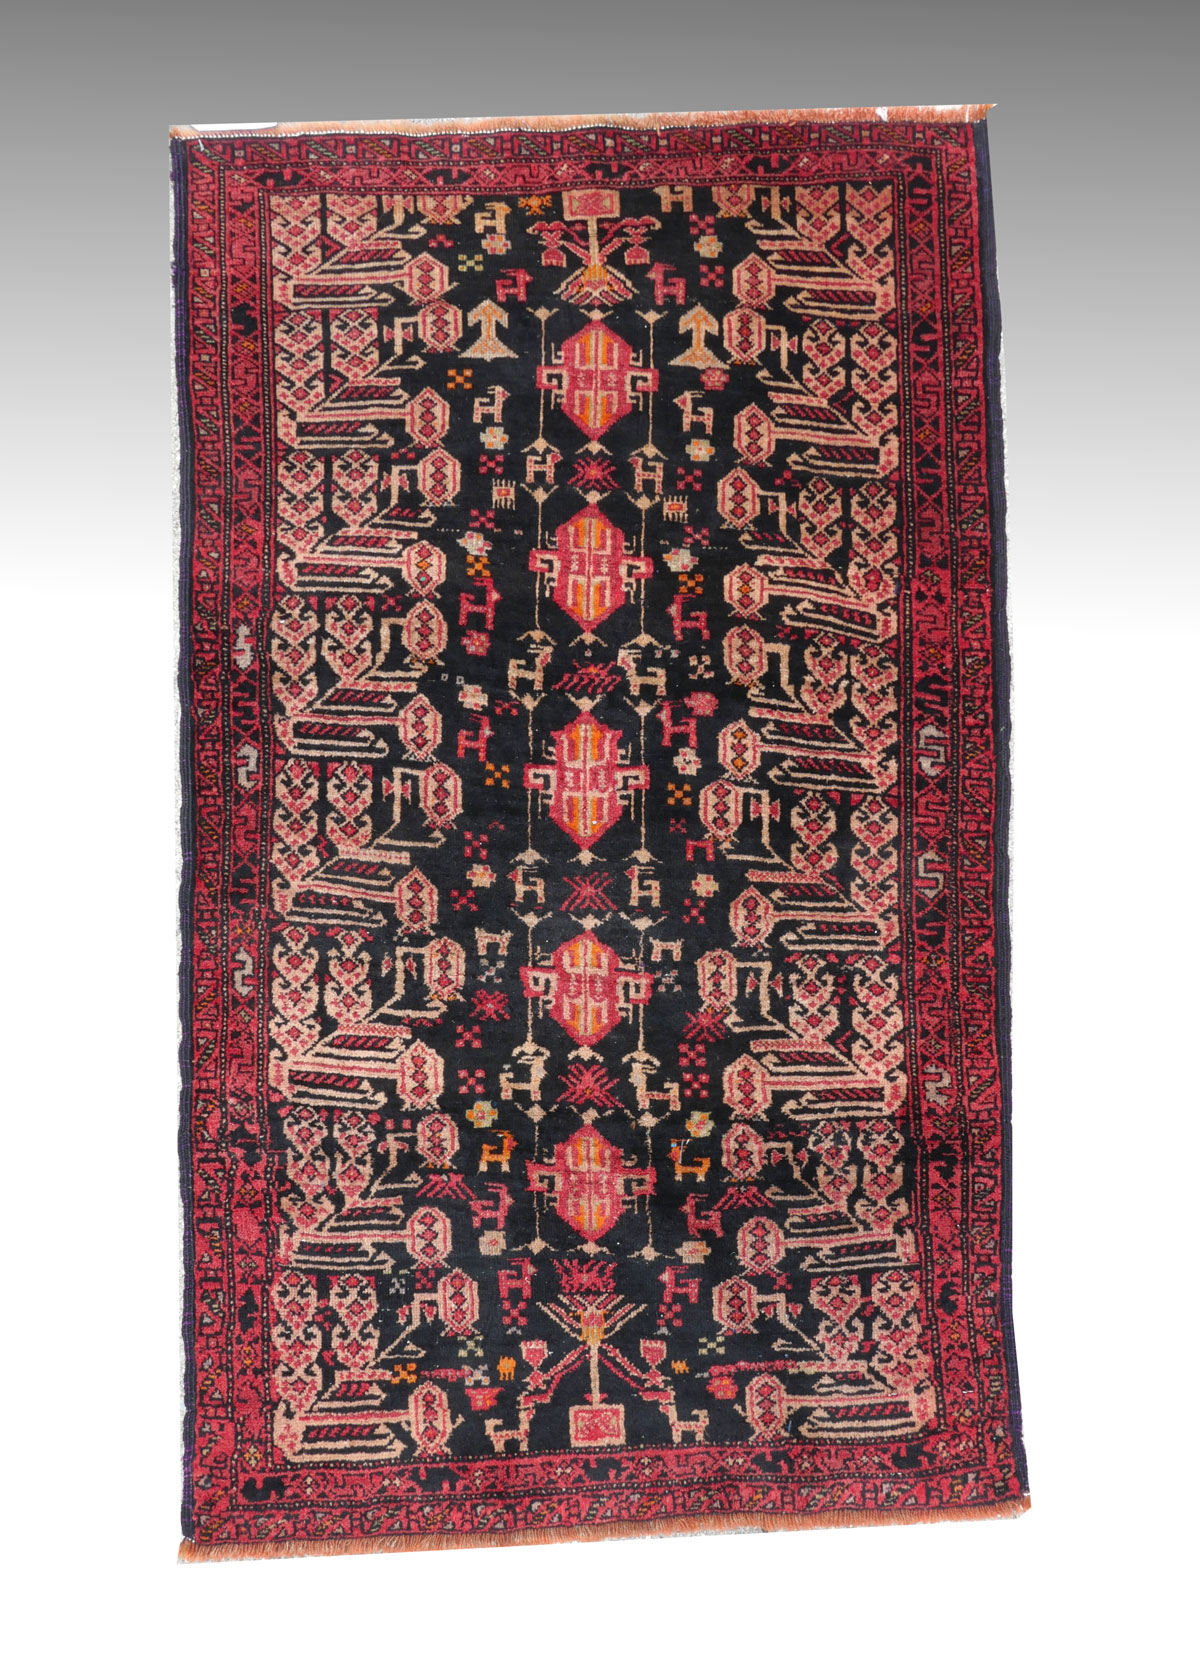 AFGHAN BELOUCHI HAND KNOTTED WOOL